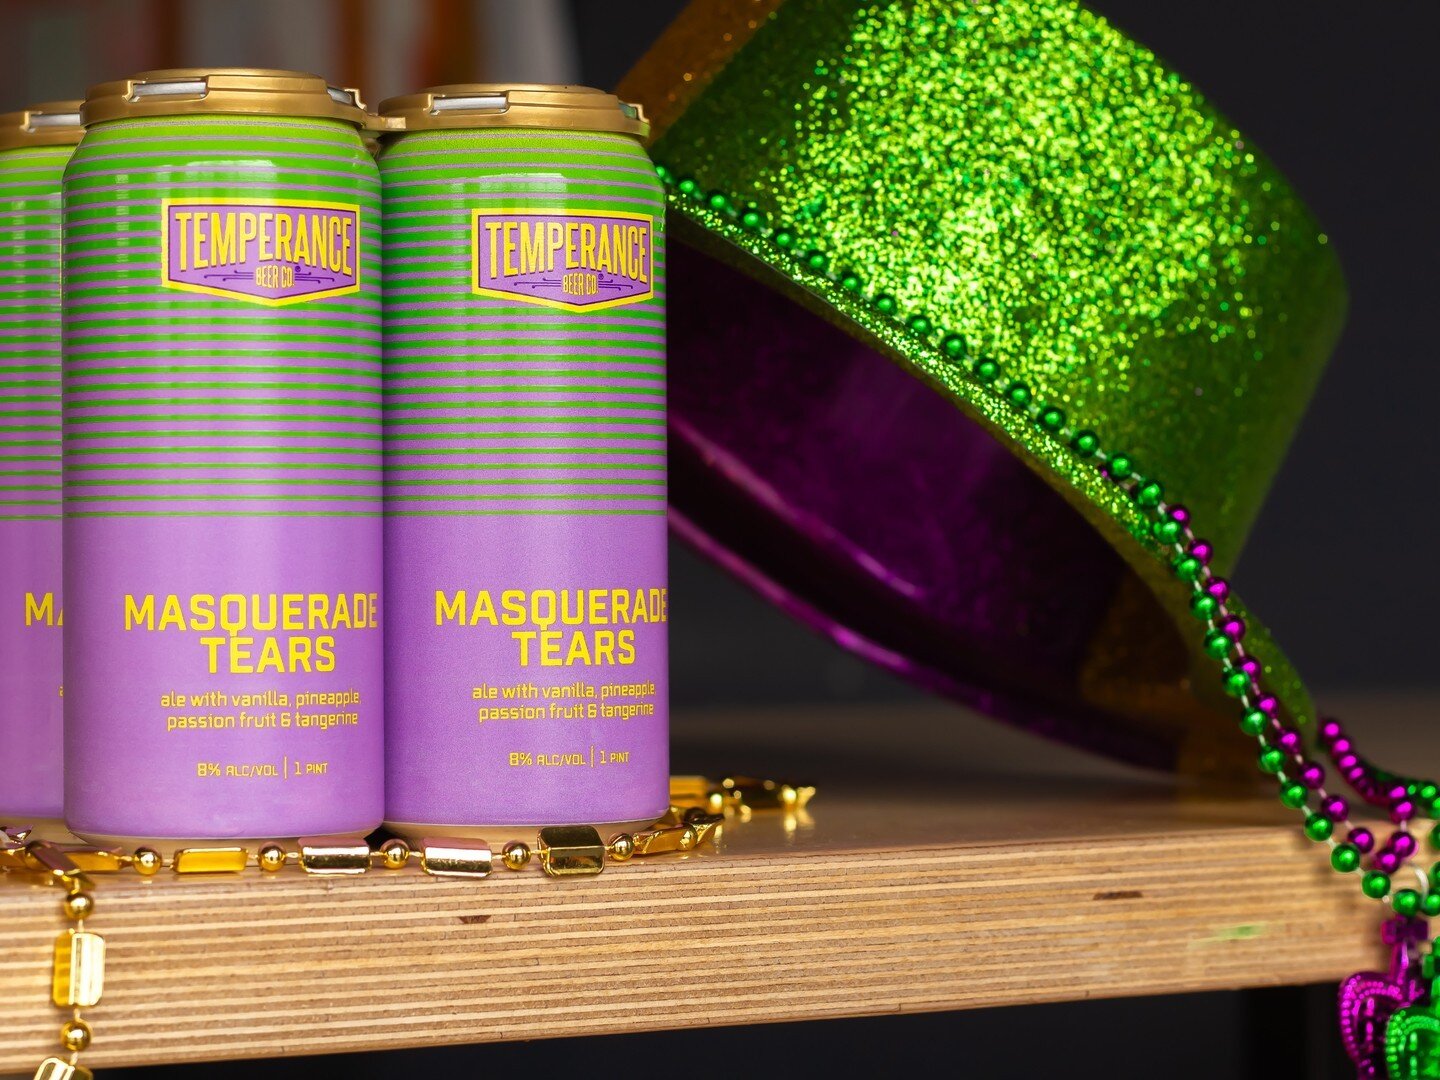 The Mardi Gras party kicks off with the return of Masquerade Tears, hitting the taps and shelves tomorrow, Feb. 9th. This isn't just any ale - it's a carnival in a can, bursting with vanilla, pineapple, passion fruit, and tangerine. At 8% ABV, it's o